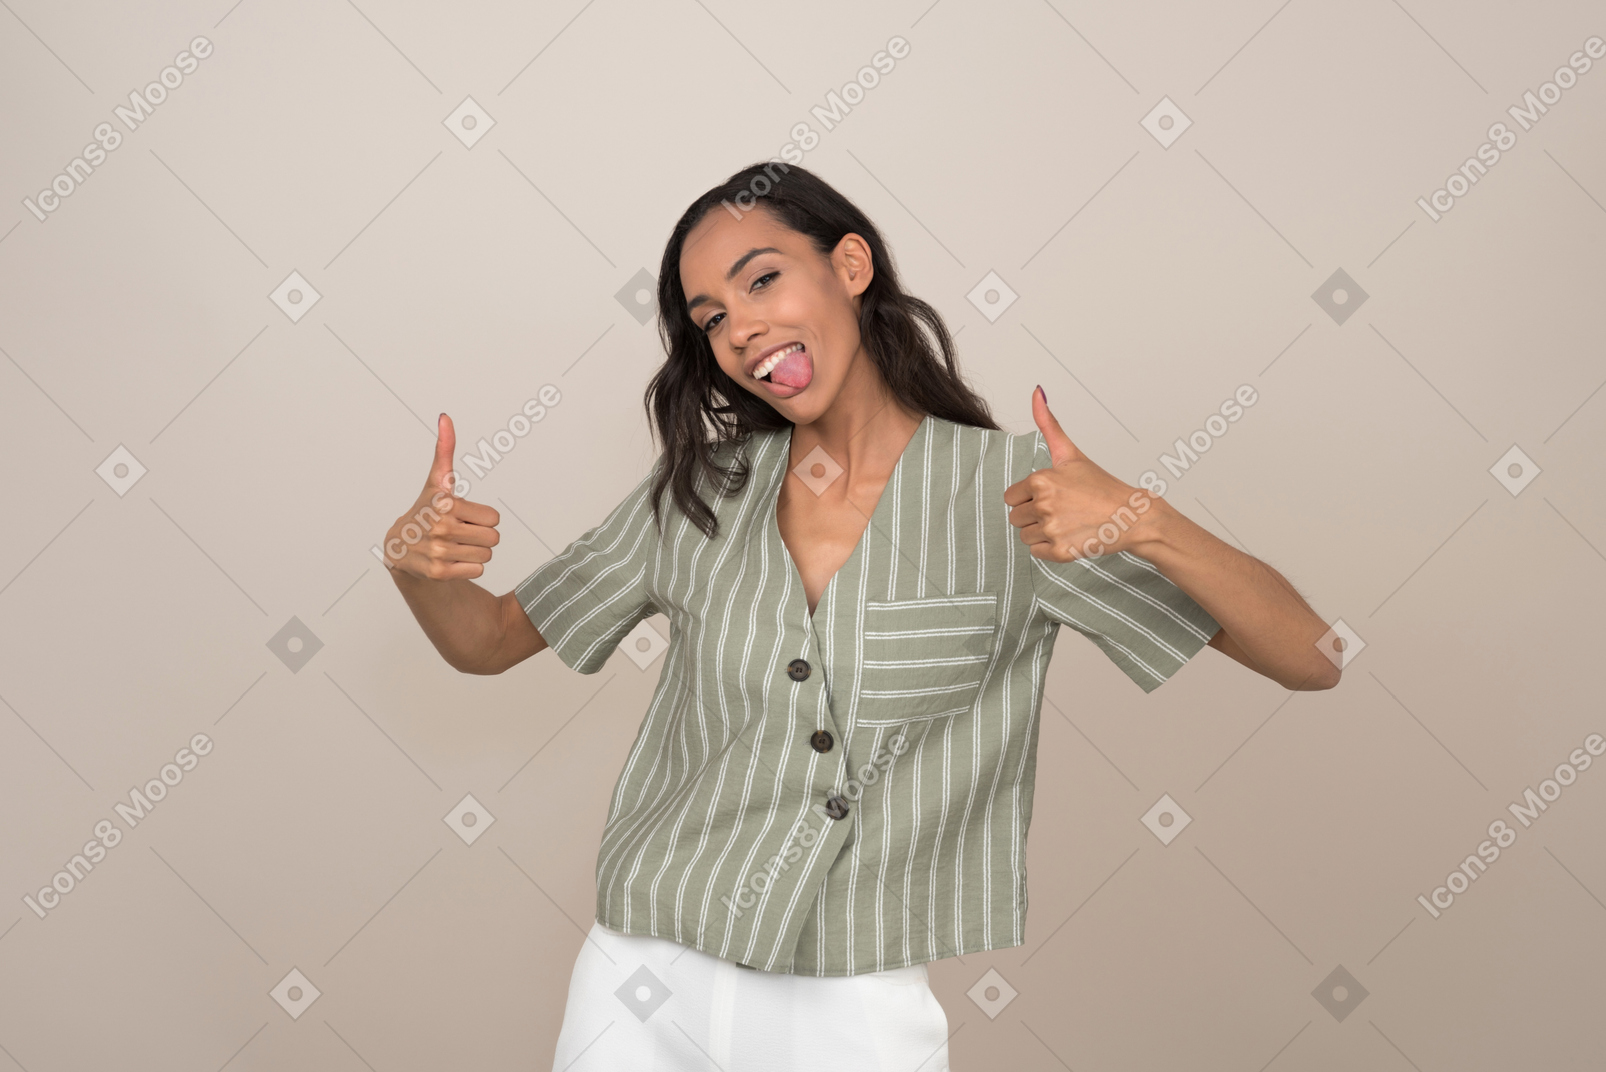 Attractive girl with a tongue out showing a thumb up